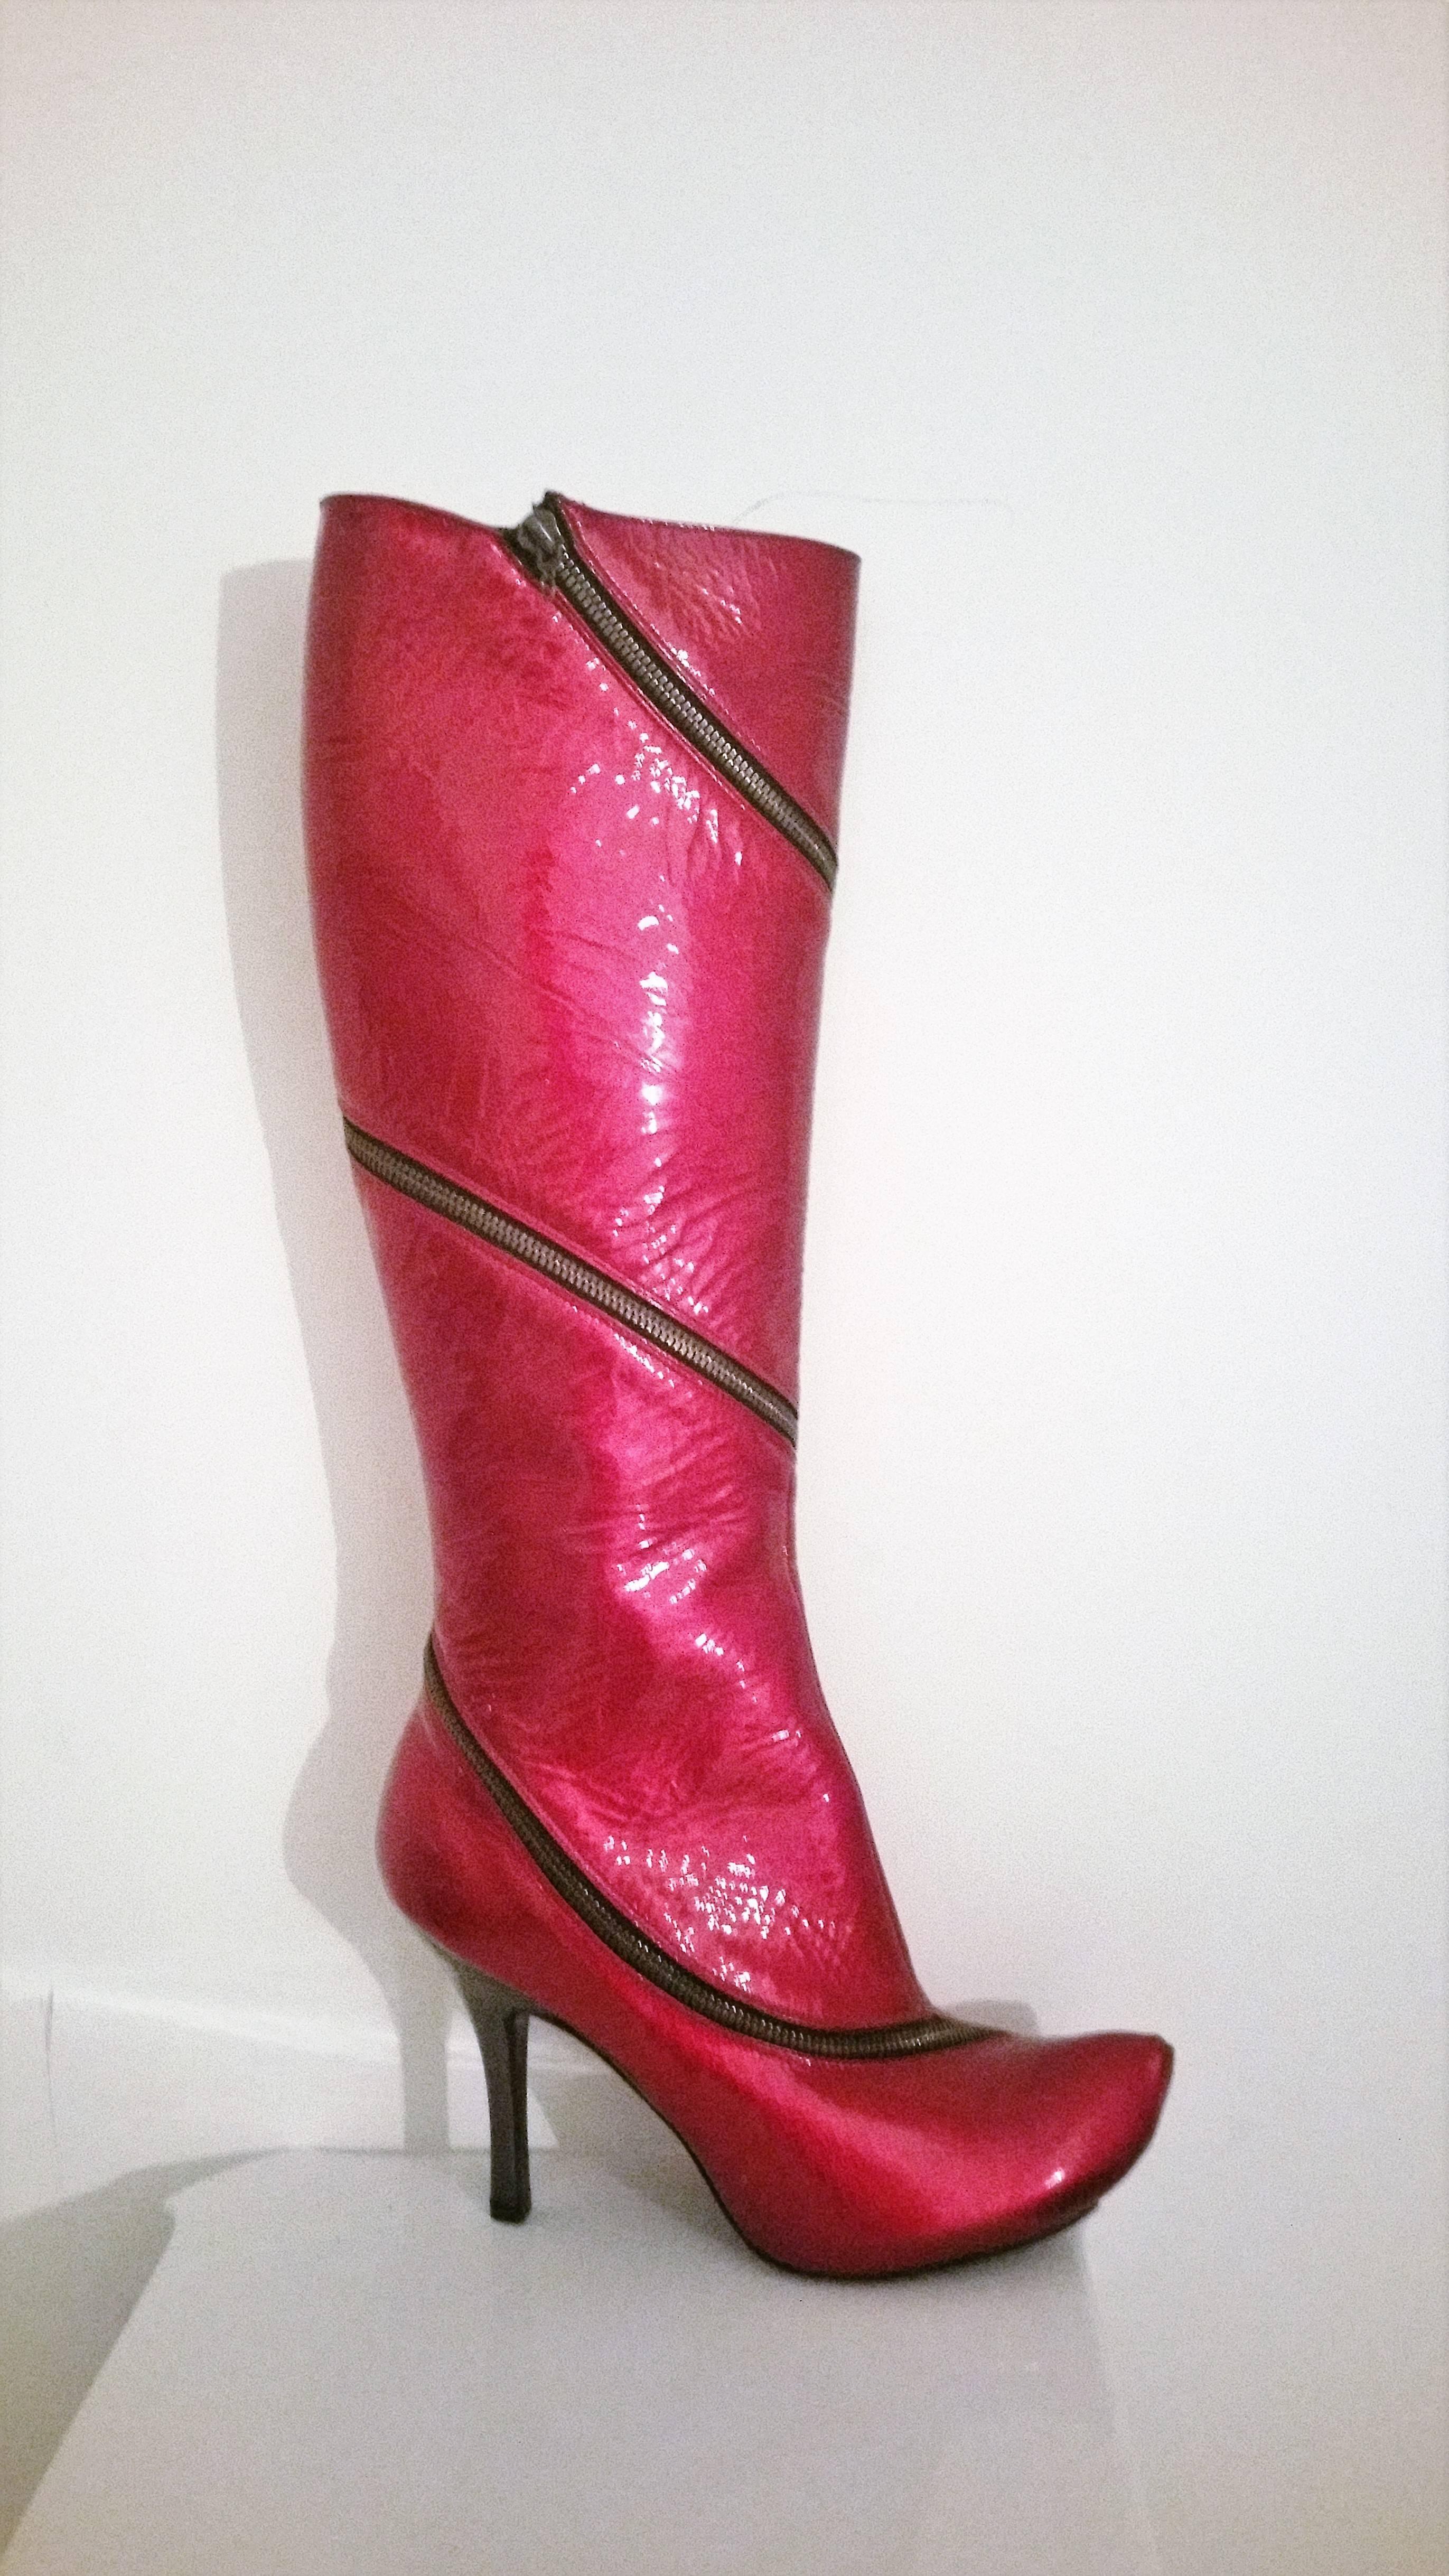 1990s Alexander McQueen red vernish boots
one of a kind red boots in italian size range 38
please note that one skull is missing
